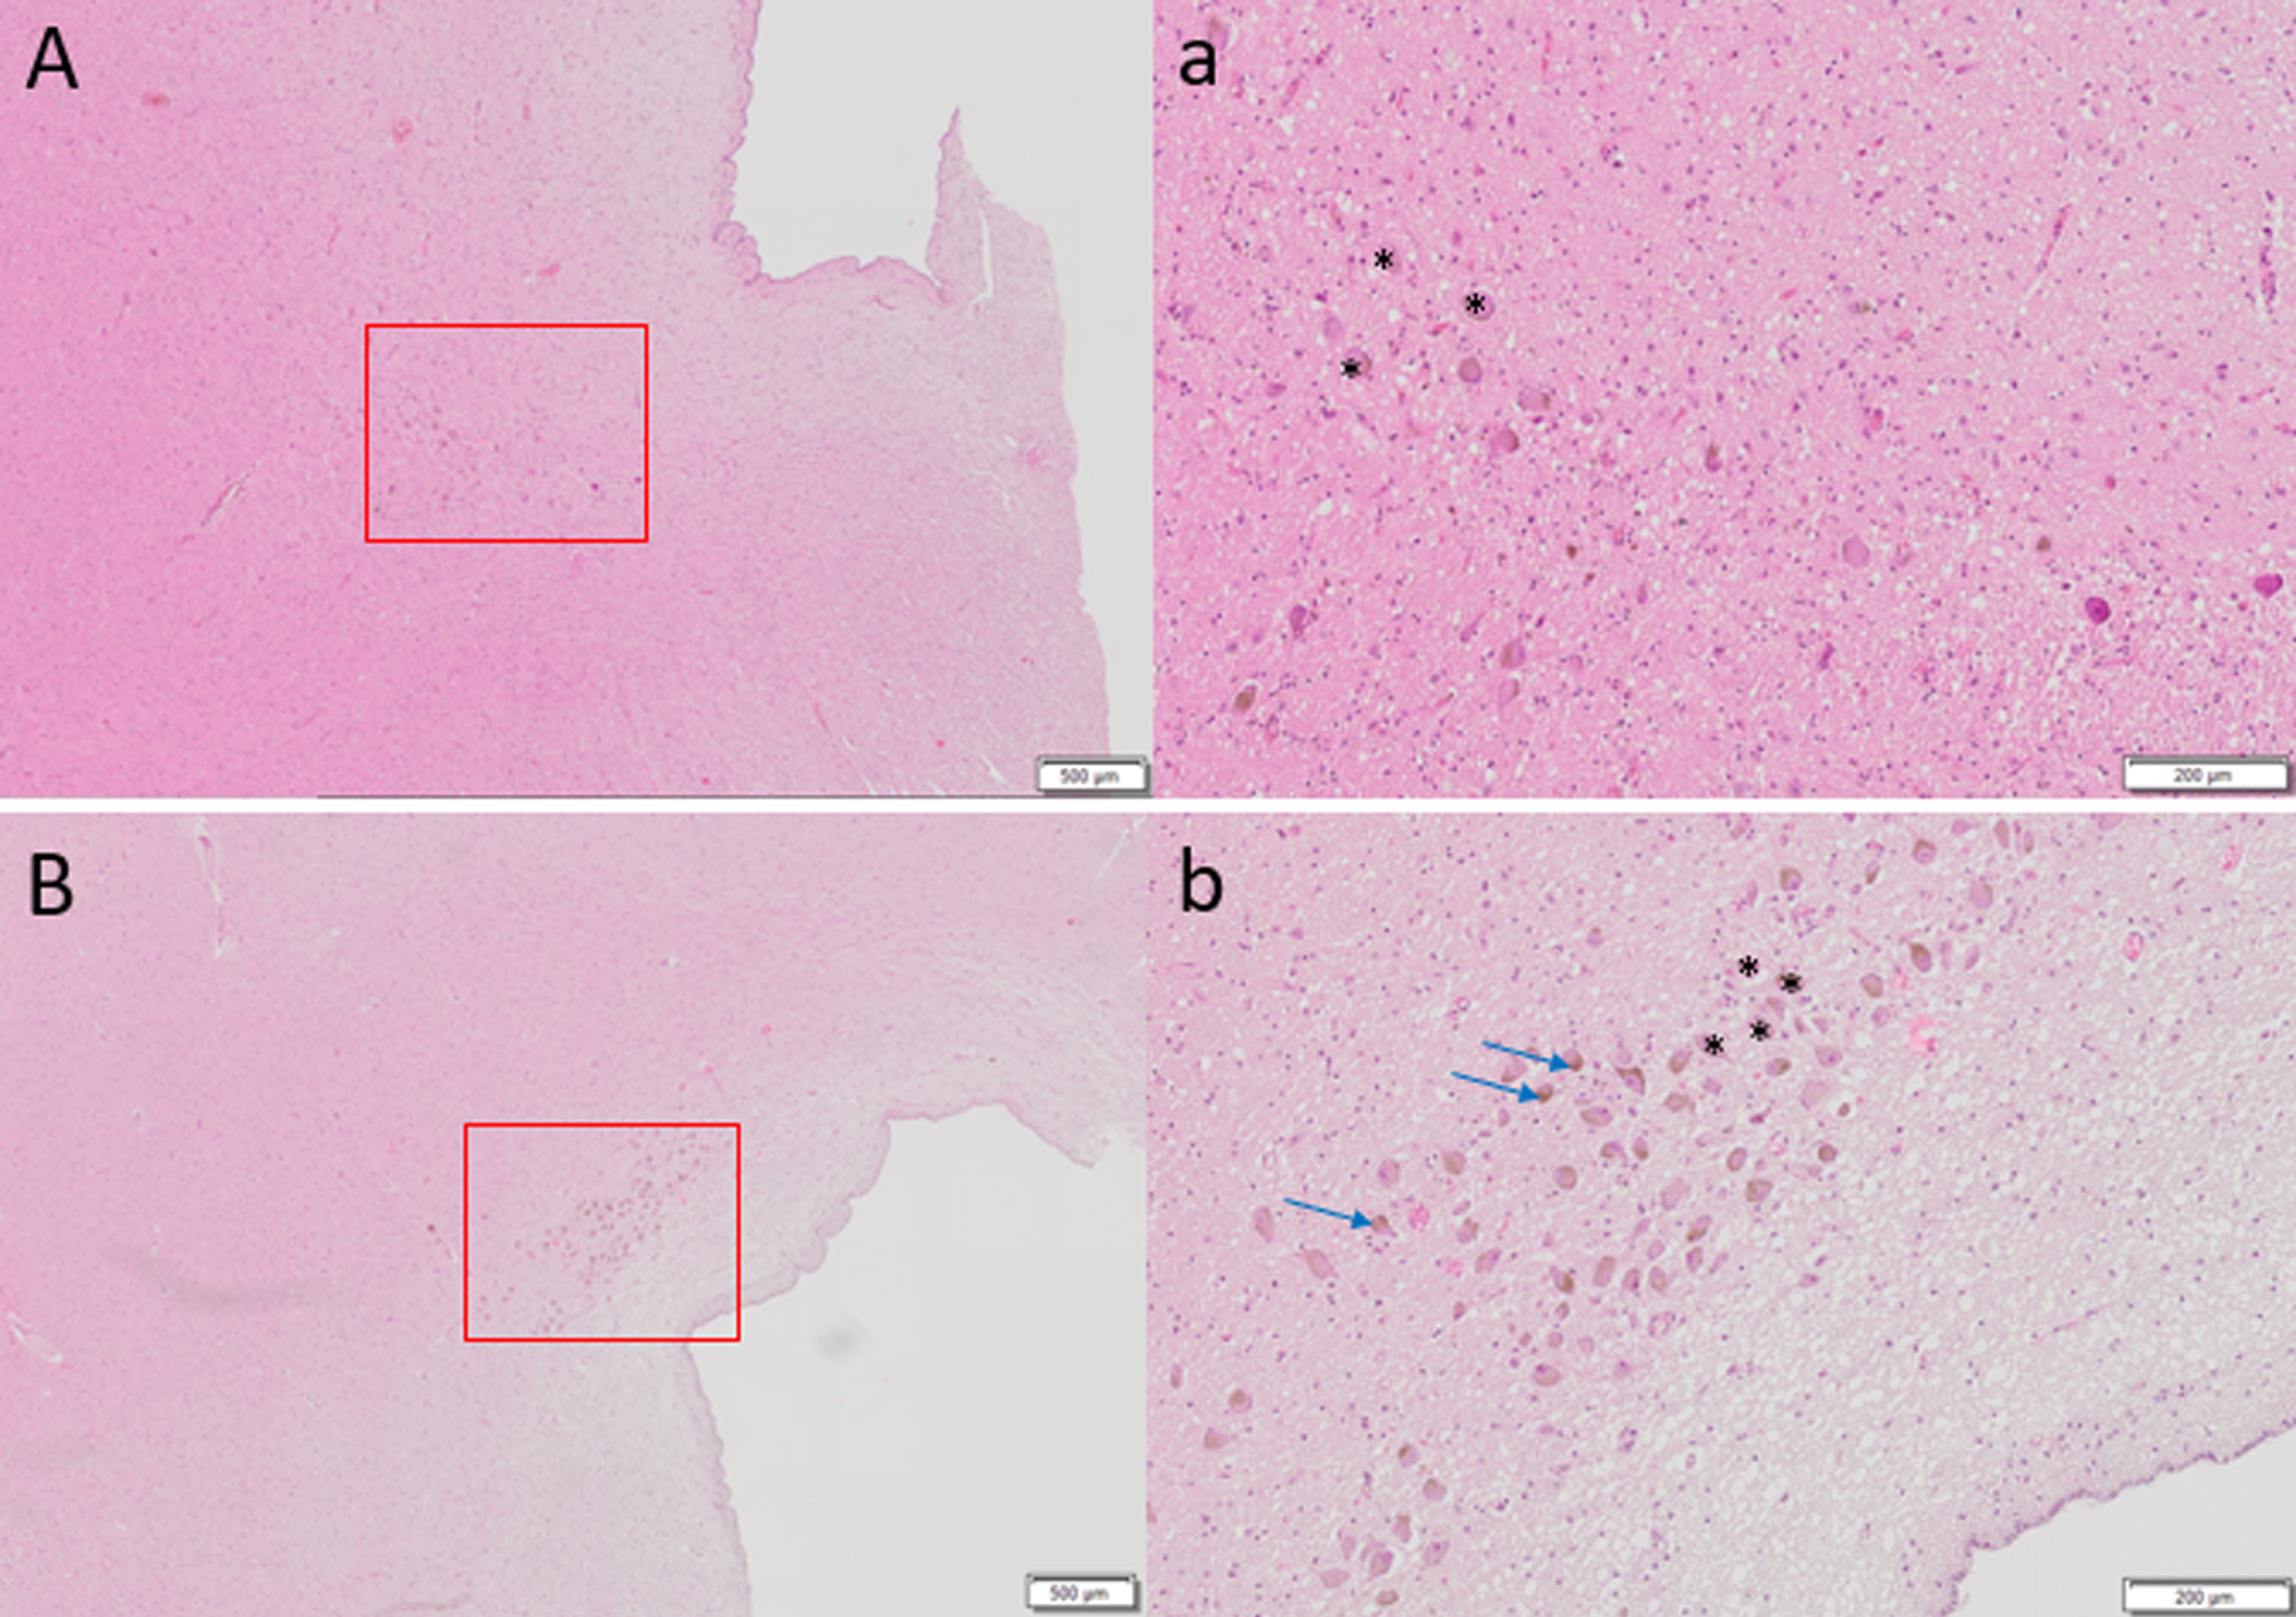 Hematoxylin and eosin staining of 6μm thick axial sections of pons to show locus coeruleus cells (denoted by *) of A) 87-year-old female with Alzheimer’s disease diagnosis at death, Braak stage 6 compared to control brain of B) 86-year-old female, Braak stage I. Far fewer LC cells are observed in A. Brown pigmented neuromelanin granules can be seen (blue arrows). Scale bar A, B = 500μm, scale bar a, b = 200μm.